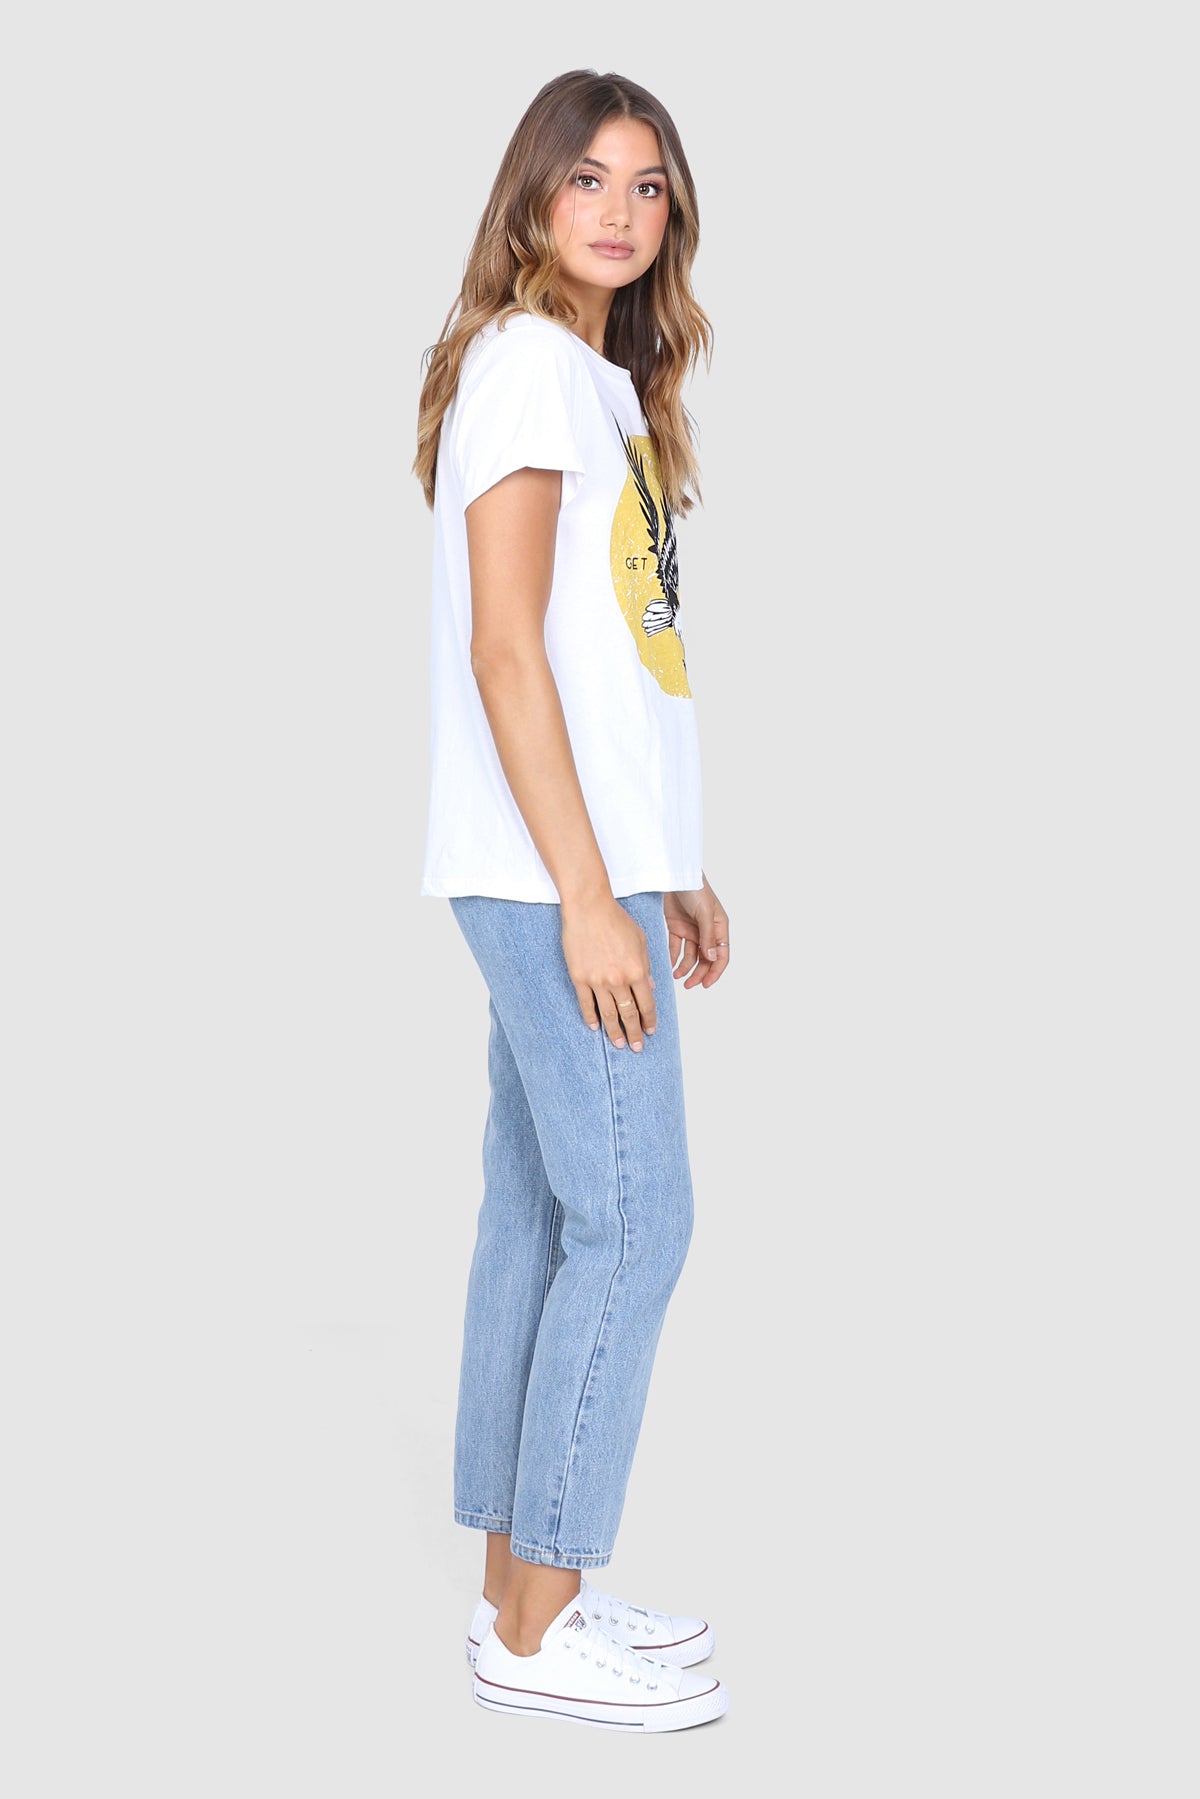 Bailage Haired Caucasian Female wearing aVintage Casual Eagle Graphic Tee Cotton Short Sleeved T-Shirt Relaxed Fit Round Neck Top paired with high waisted light washed mom jeans and white converse